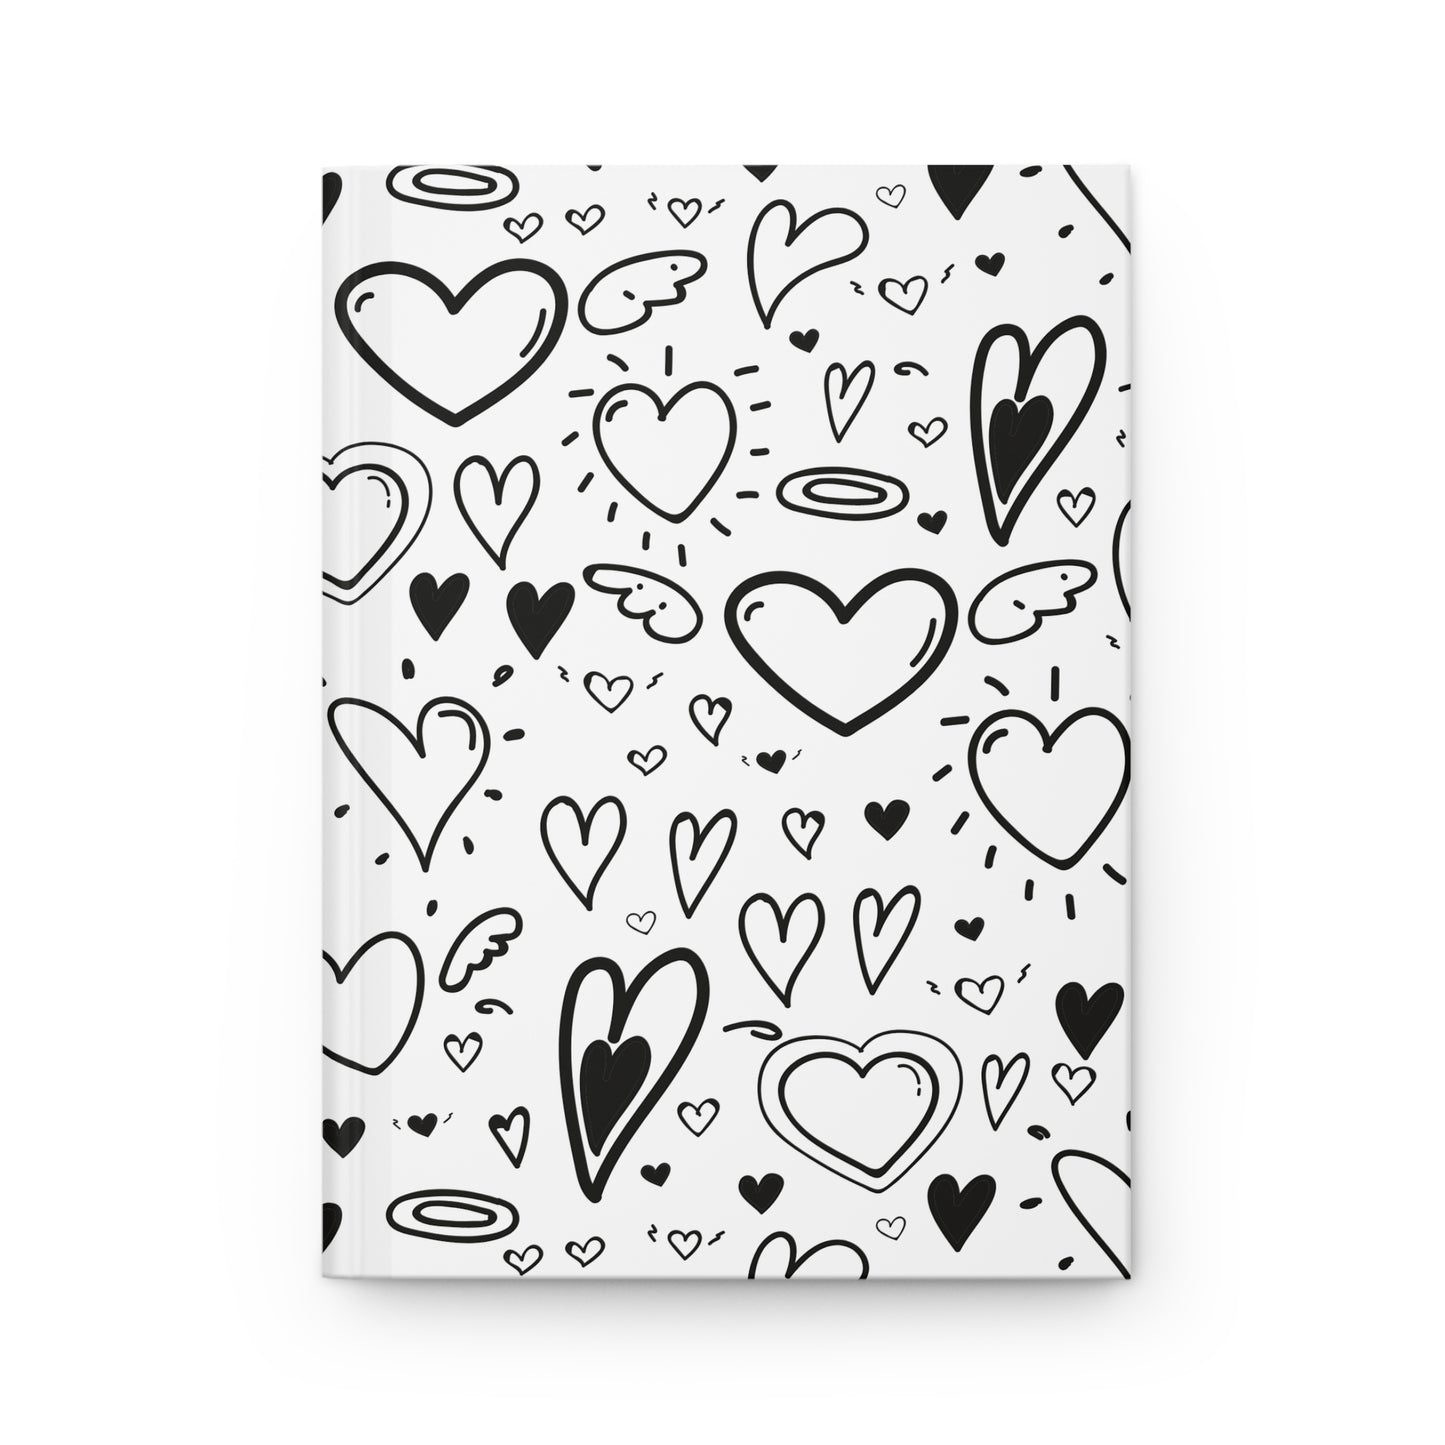 Beautiful Everyday Journaling - Self Love - Black and White Doodles - Hearts - Hardcover Journal Matte